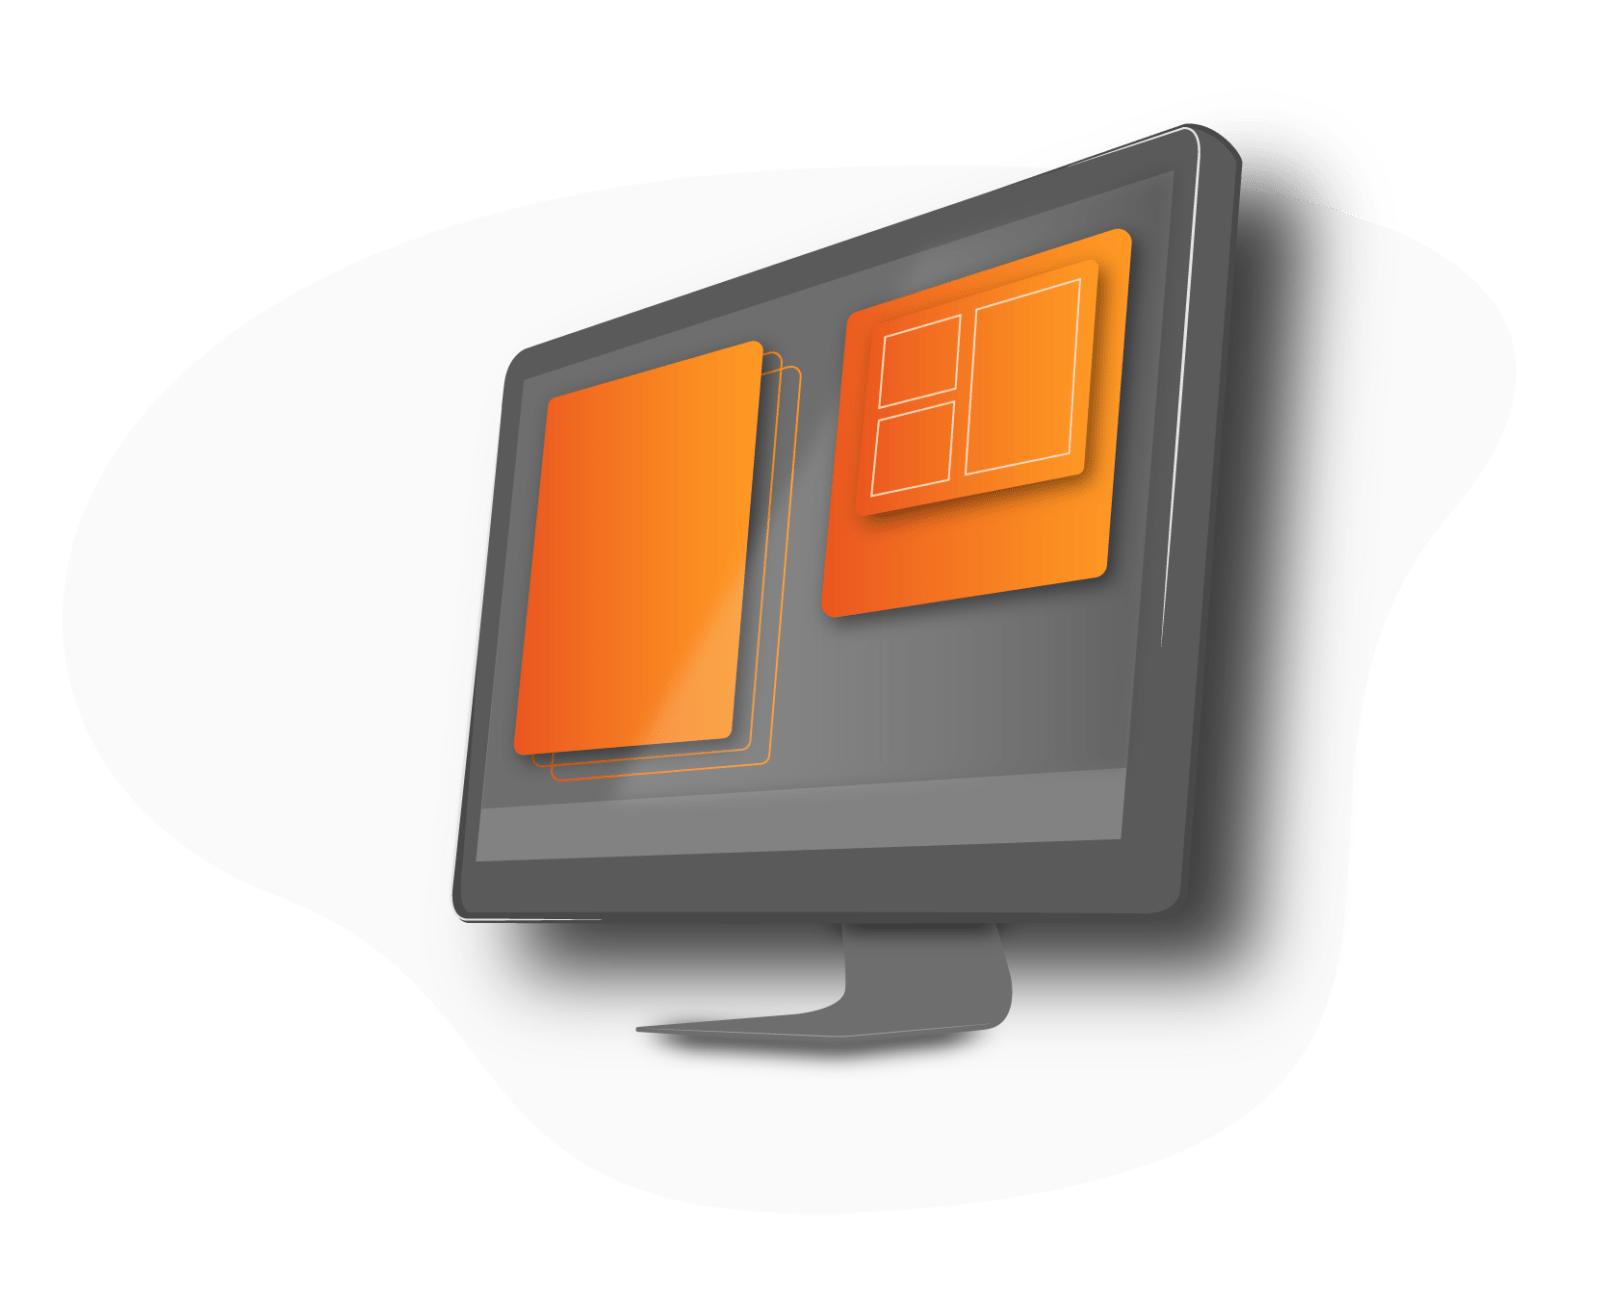 Graphic illustration of a desktop computer screen with orange boxes on the screen.